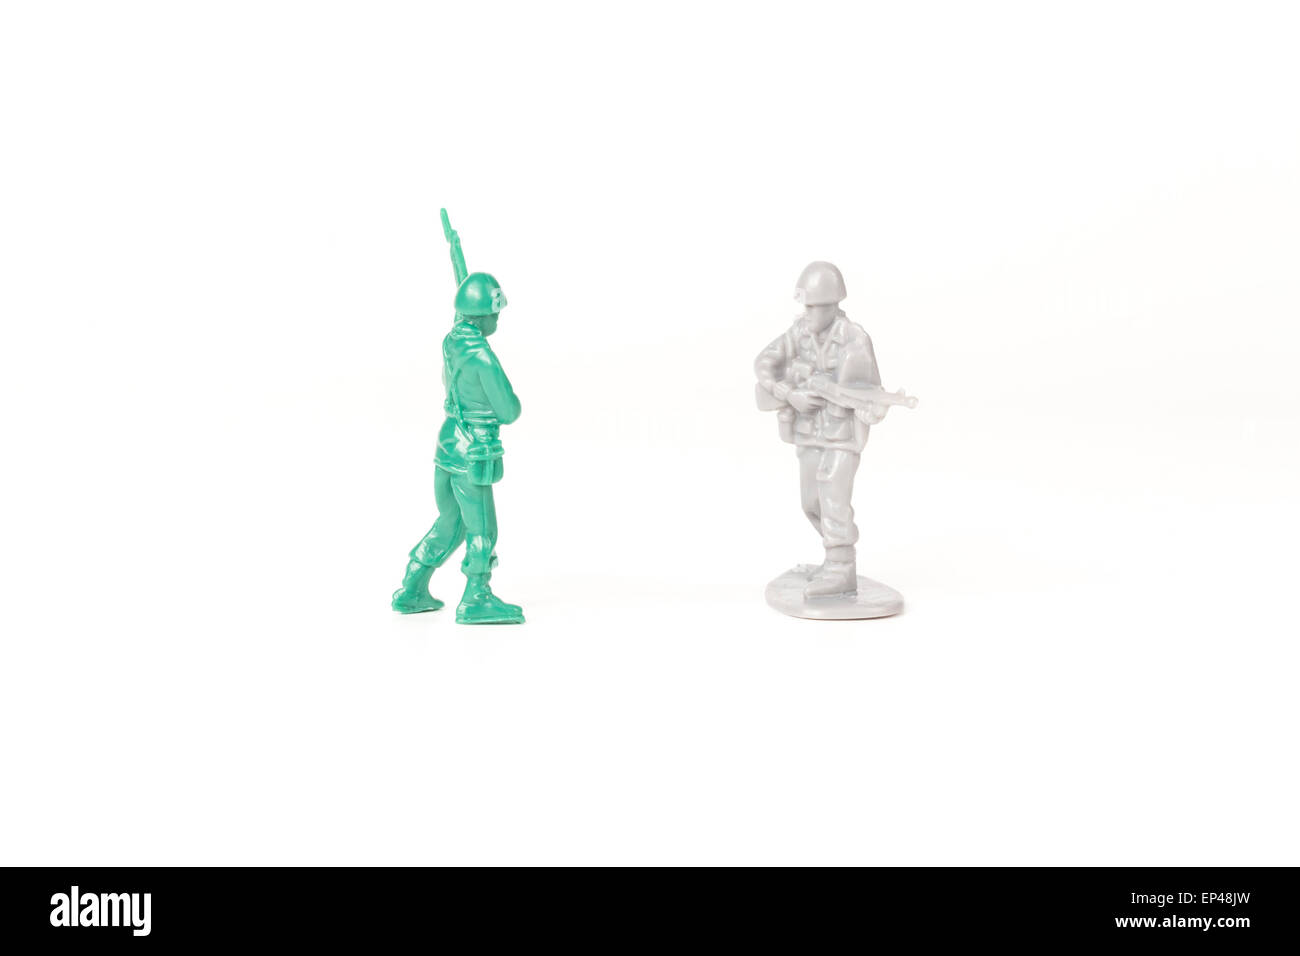 Two different toy army men cross paths Stock Photo